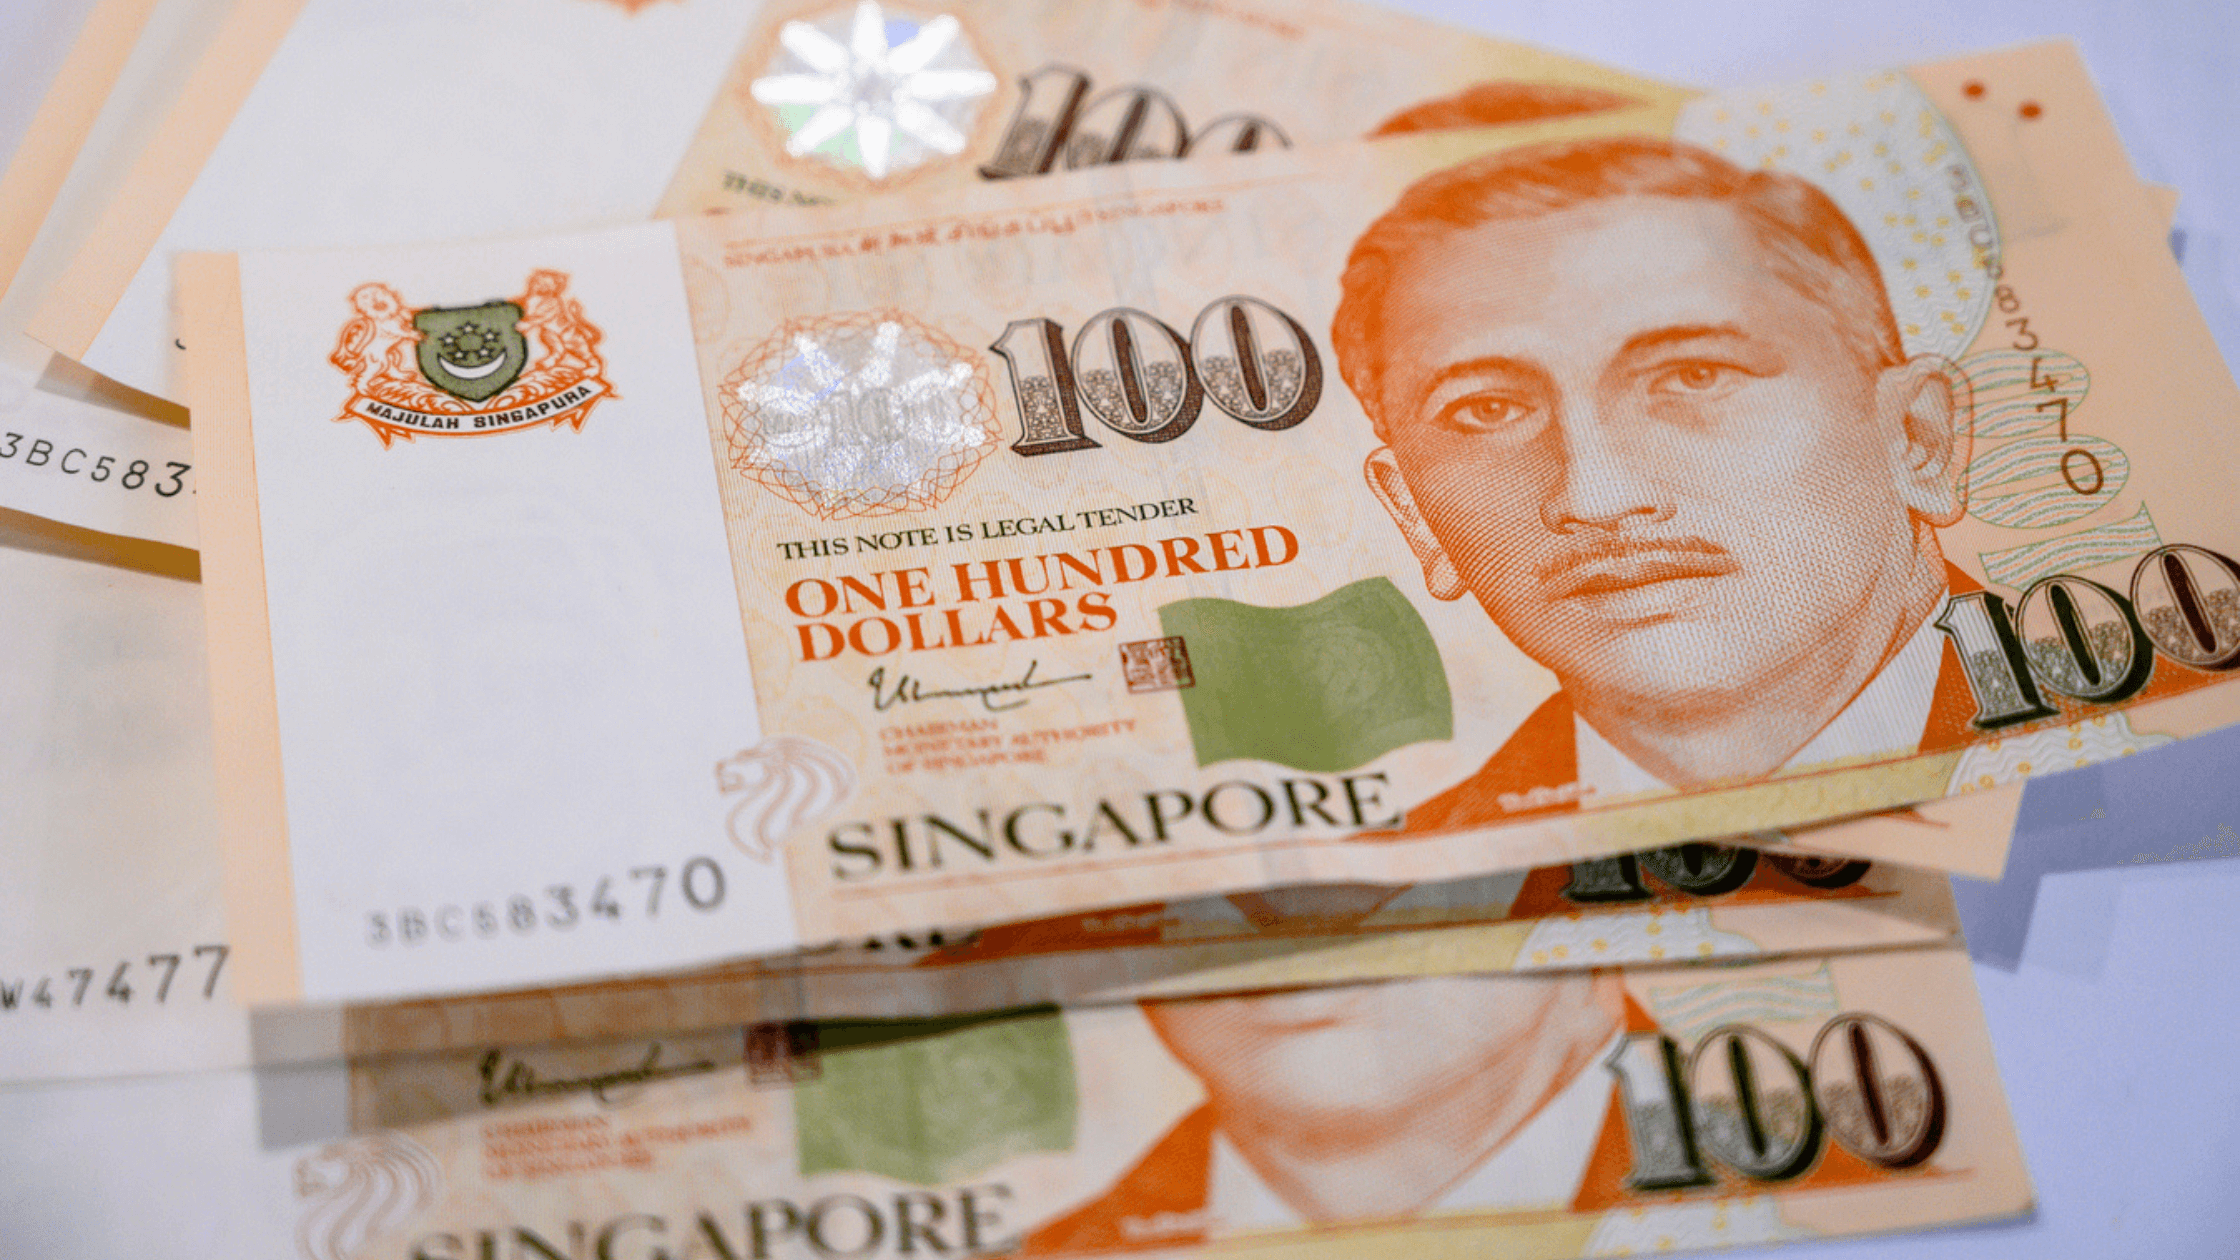 Singapore’s Latest Treasury Bill Yields Over 4%: What Investors Should Know